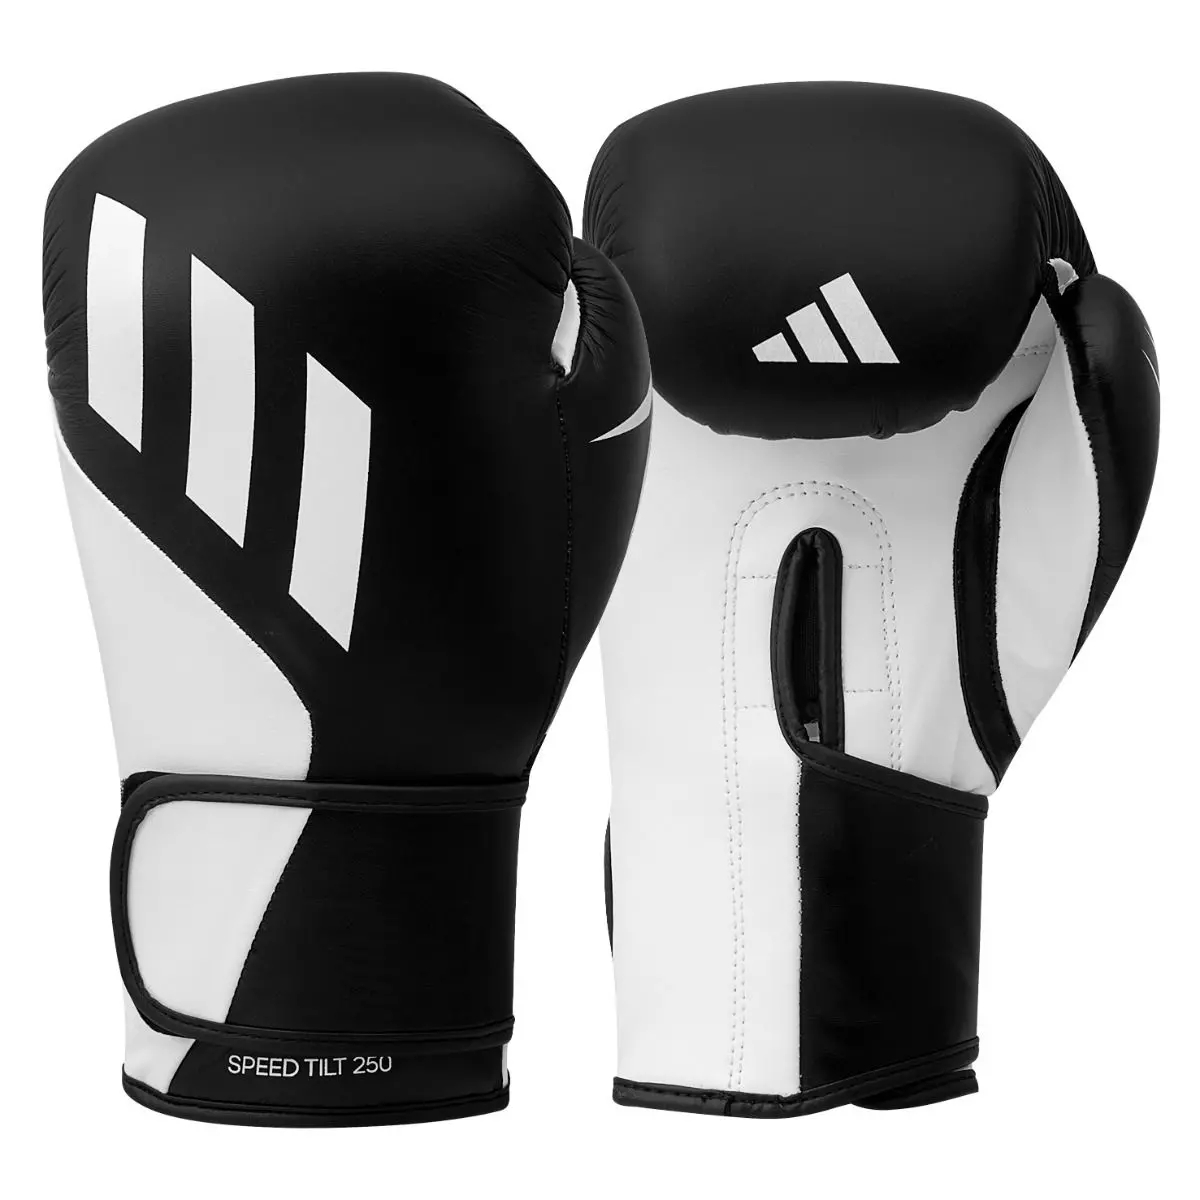 Adidas Speed Tilt 250 Boxing Gloves - Black - Click Image to Close